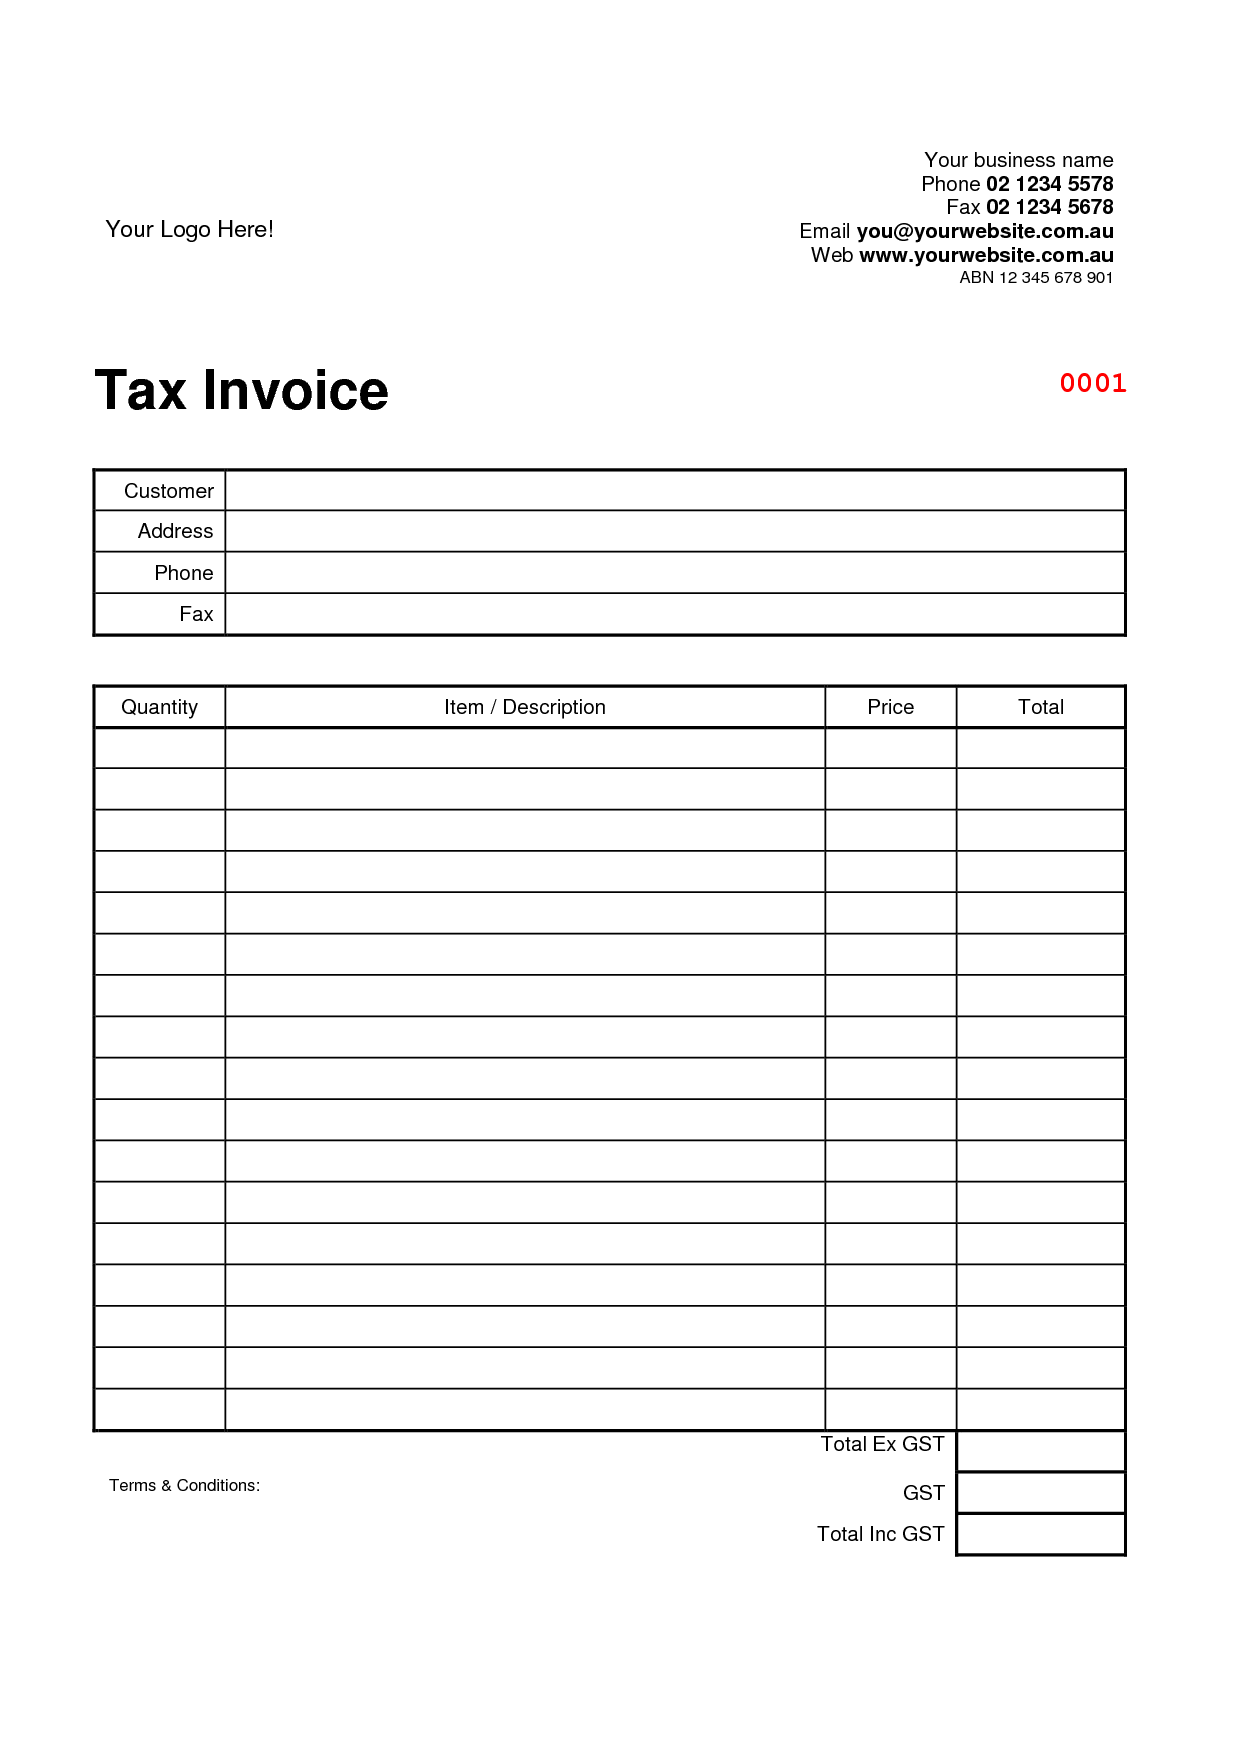 Tax Invoice Template Word Doc Blank Medical Forms Sample Business 